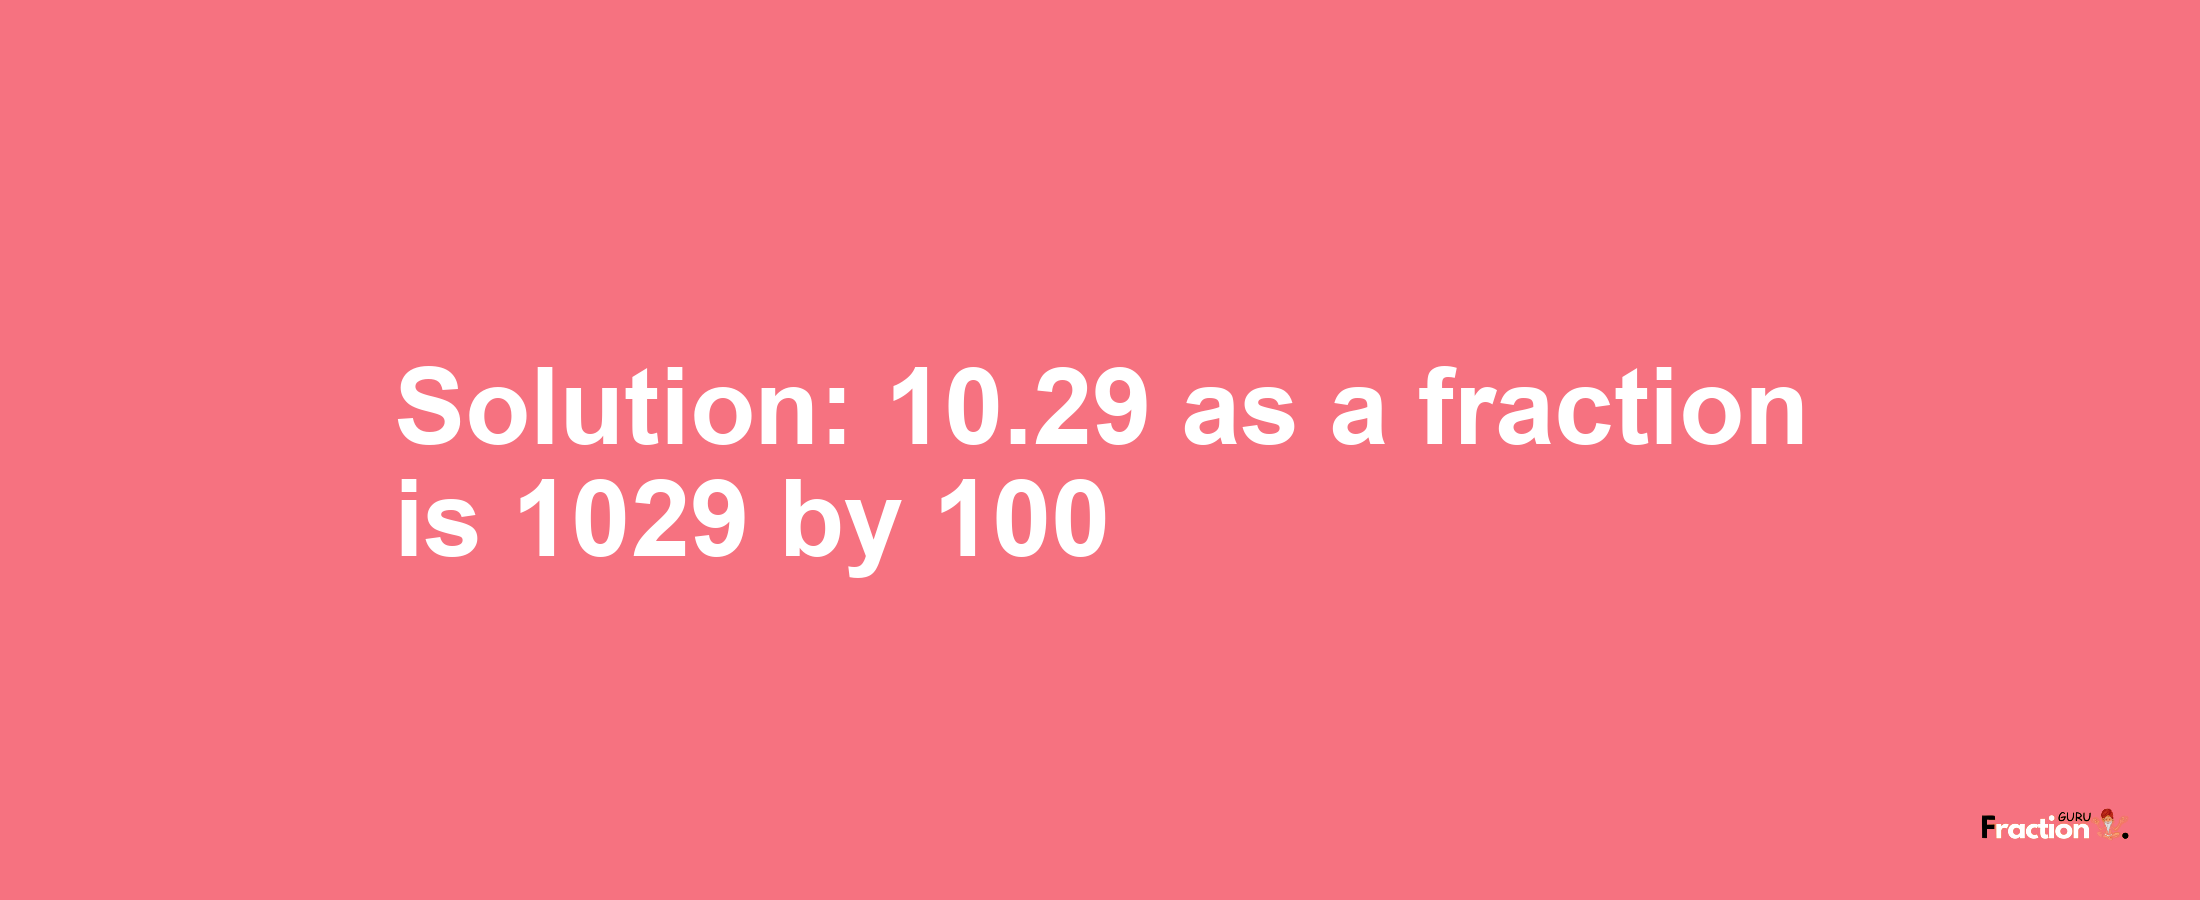 Solution:10.29 as a fraction is 1029/100